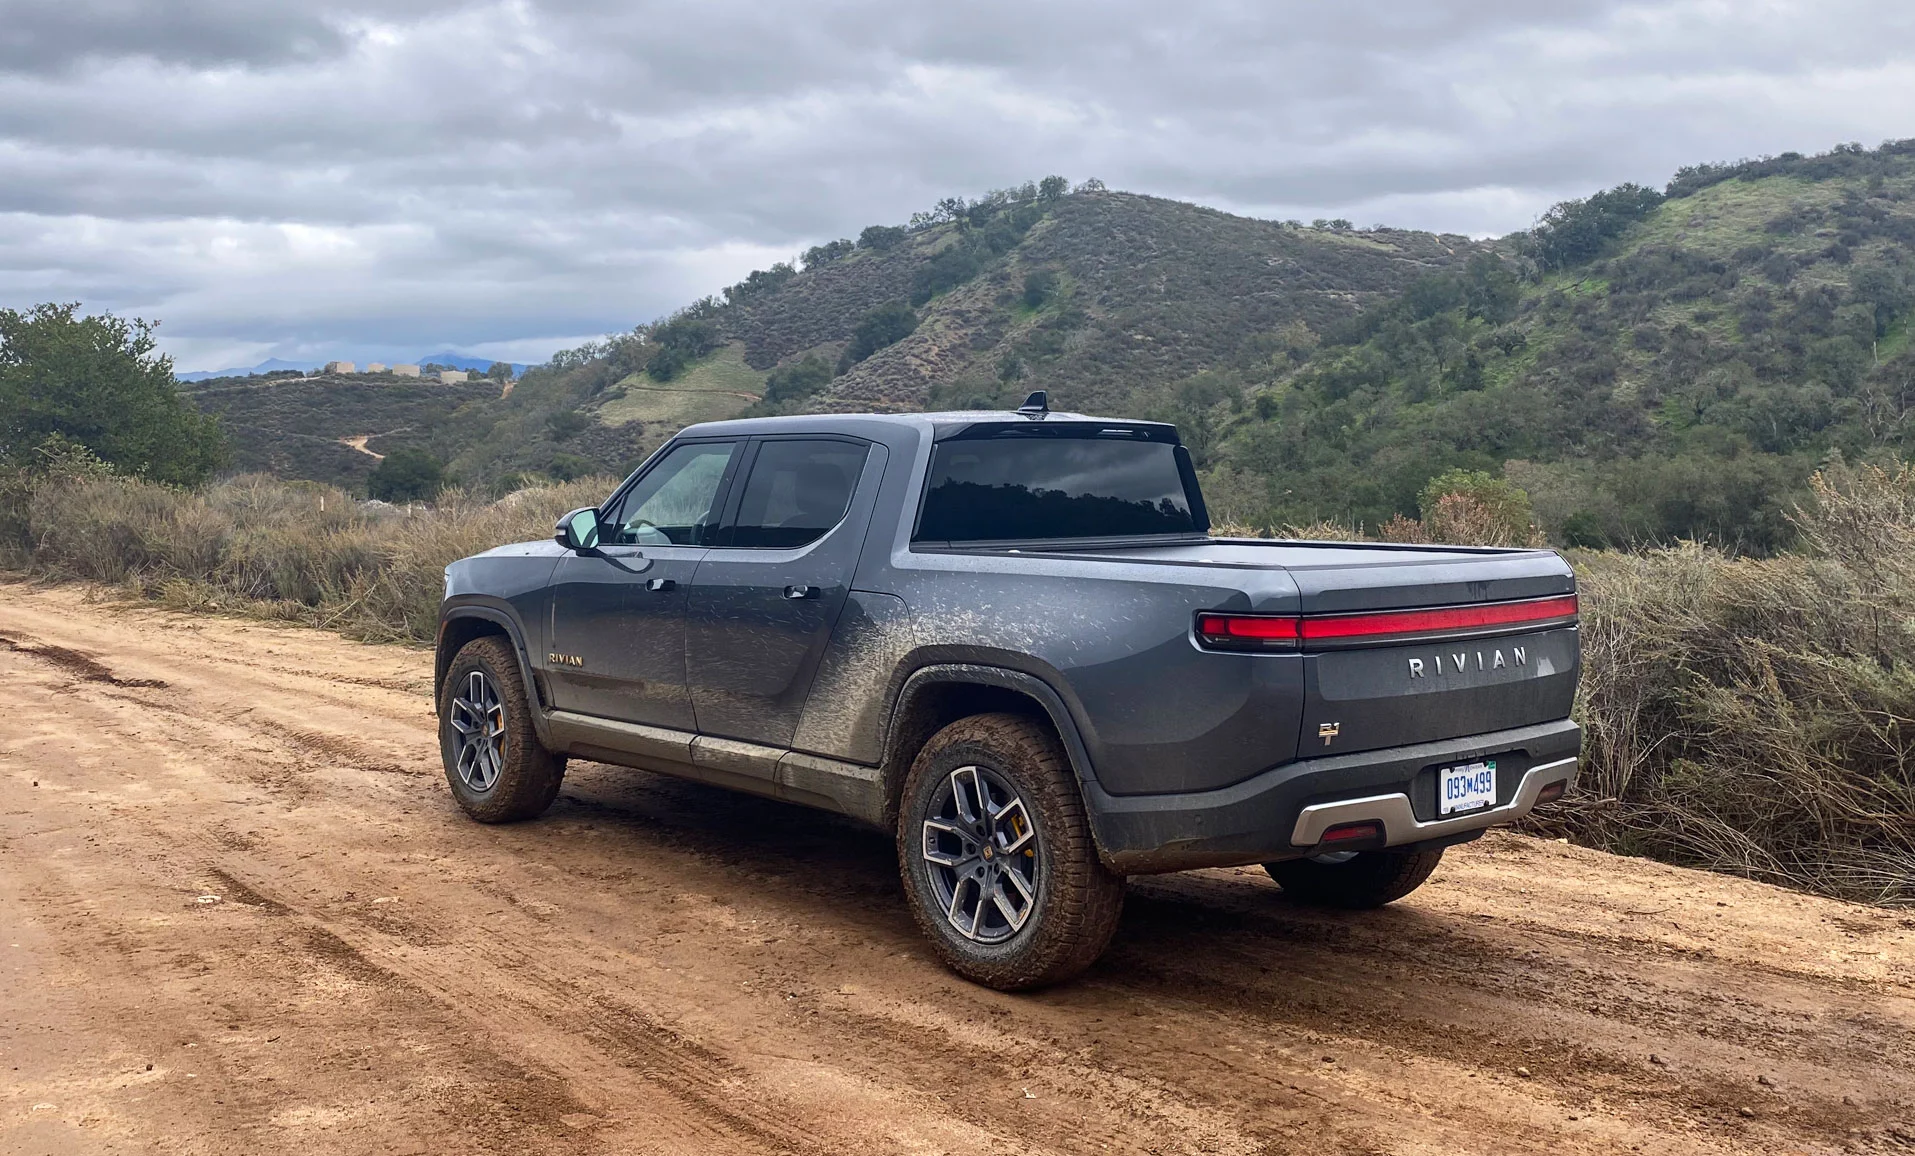 Rivian lays off 6 percent of its workforce as it struggles with EV production